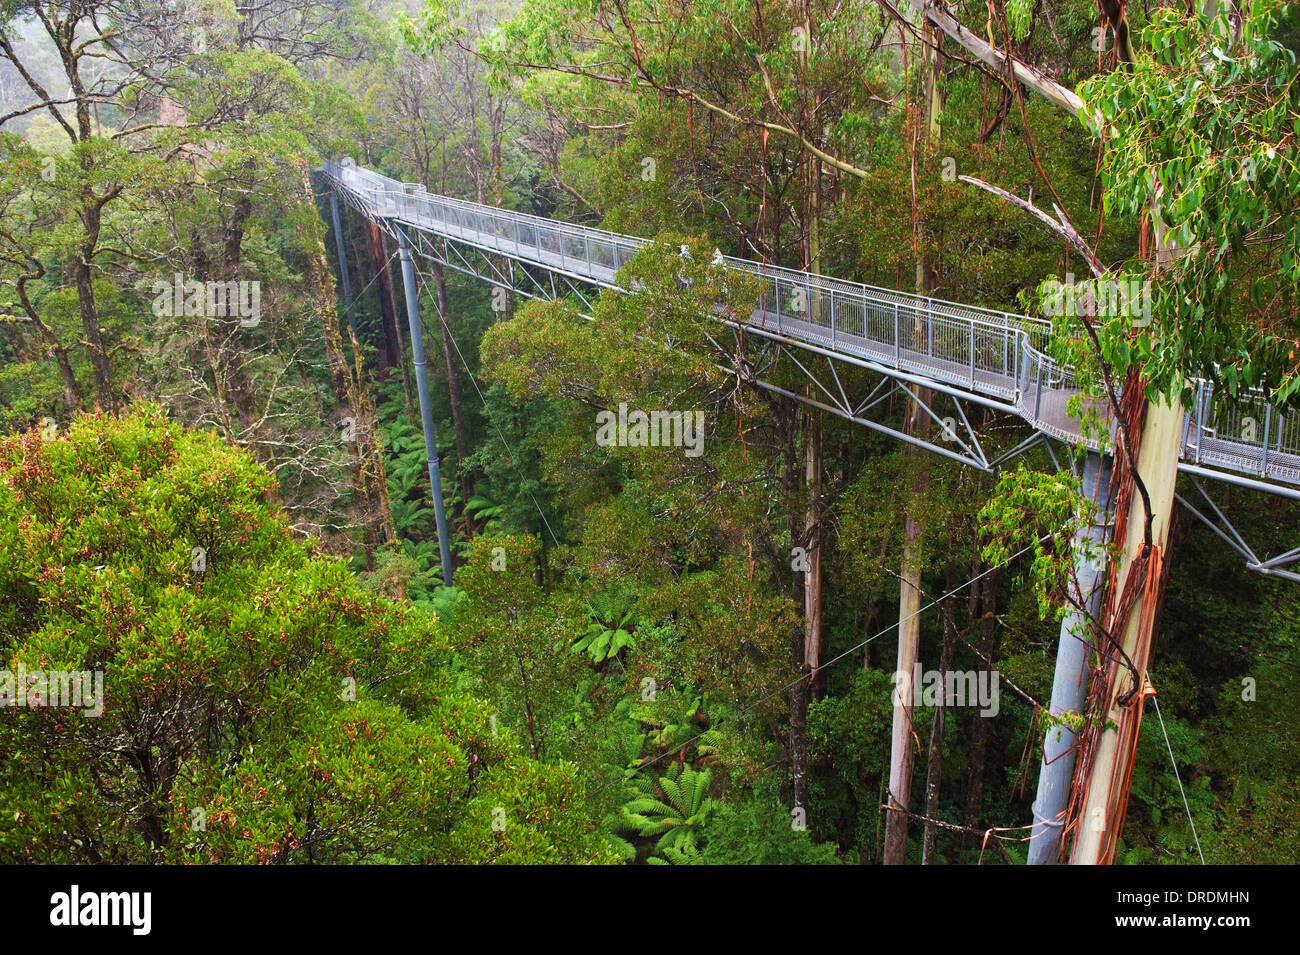 The steel walkway Otway Fly in the Rainforest up to 30 meters above ground level,Great Ocean Road, Australia Stock Photo